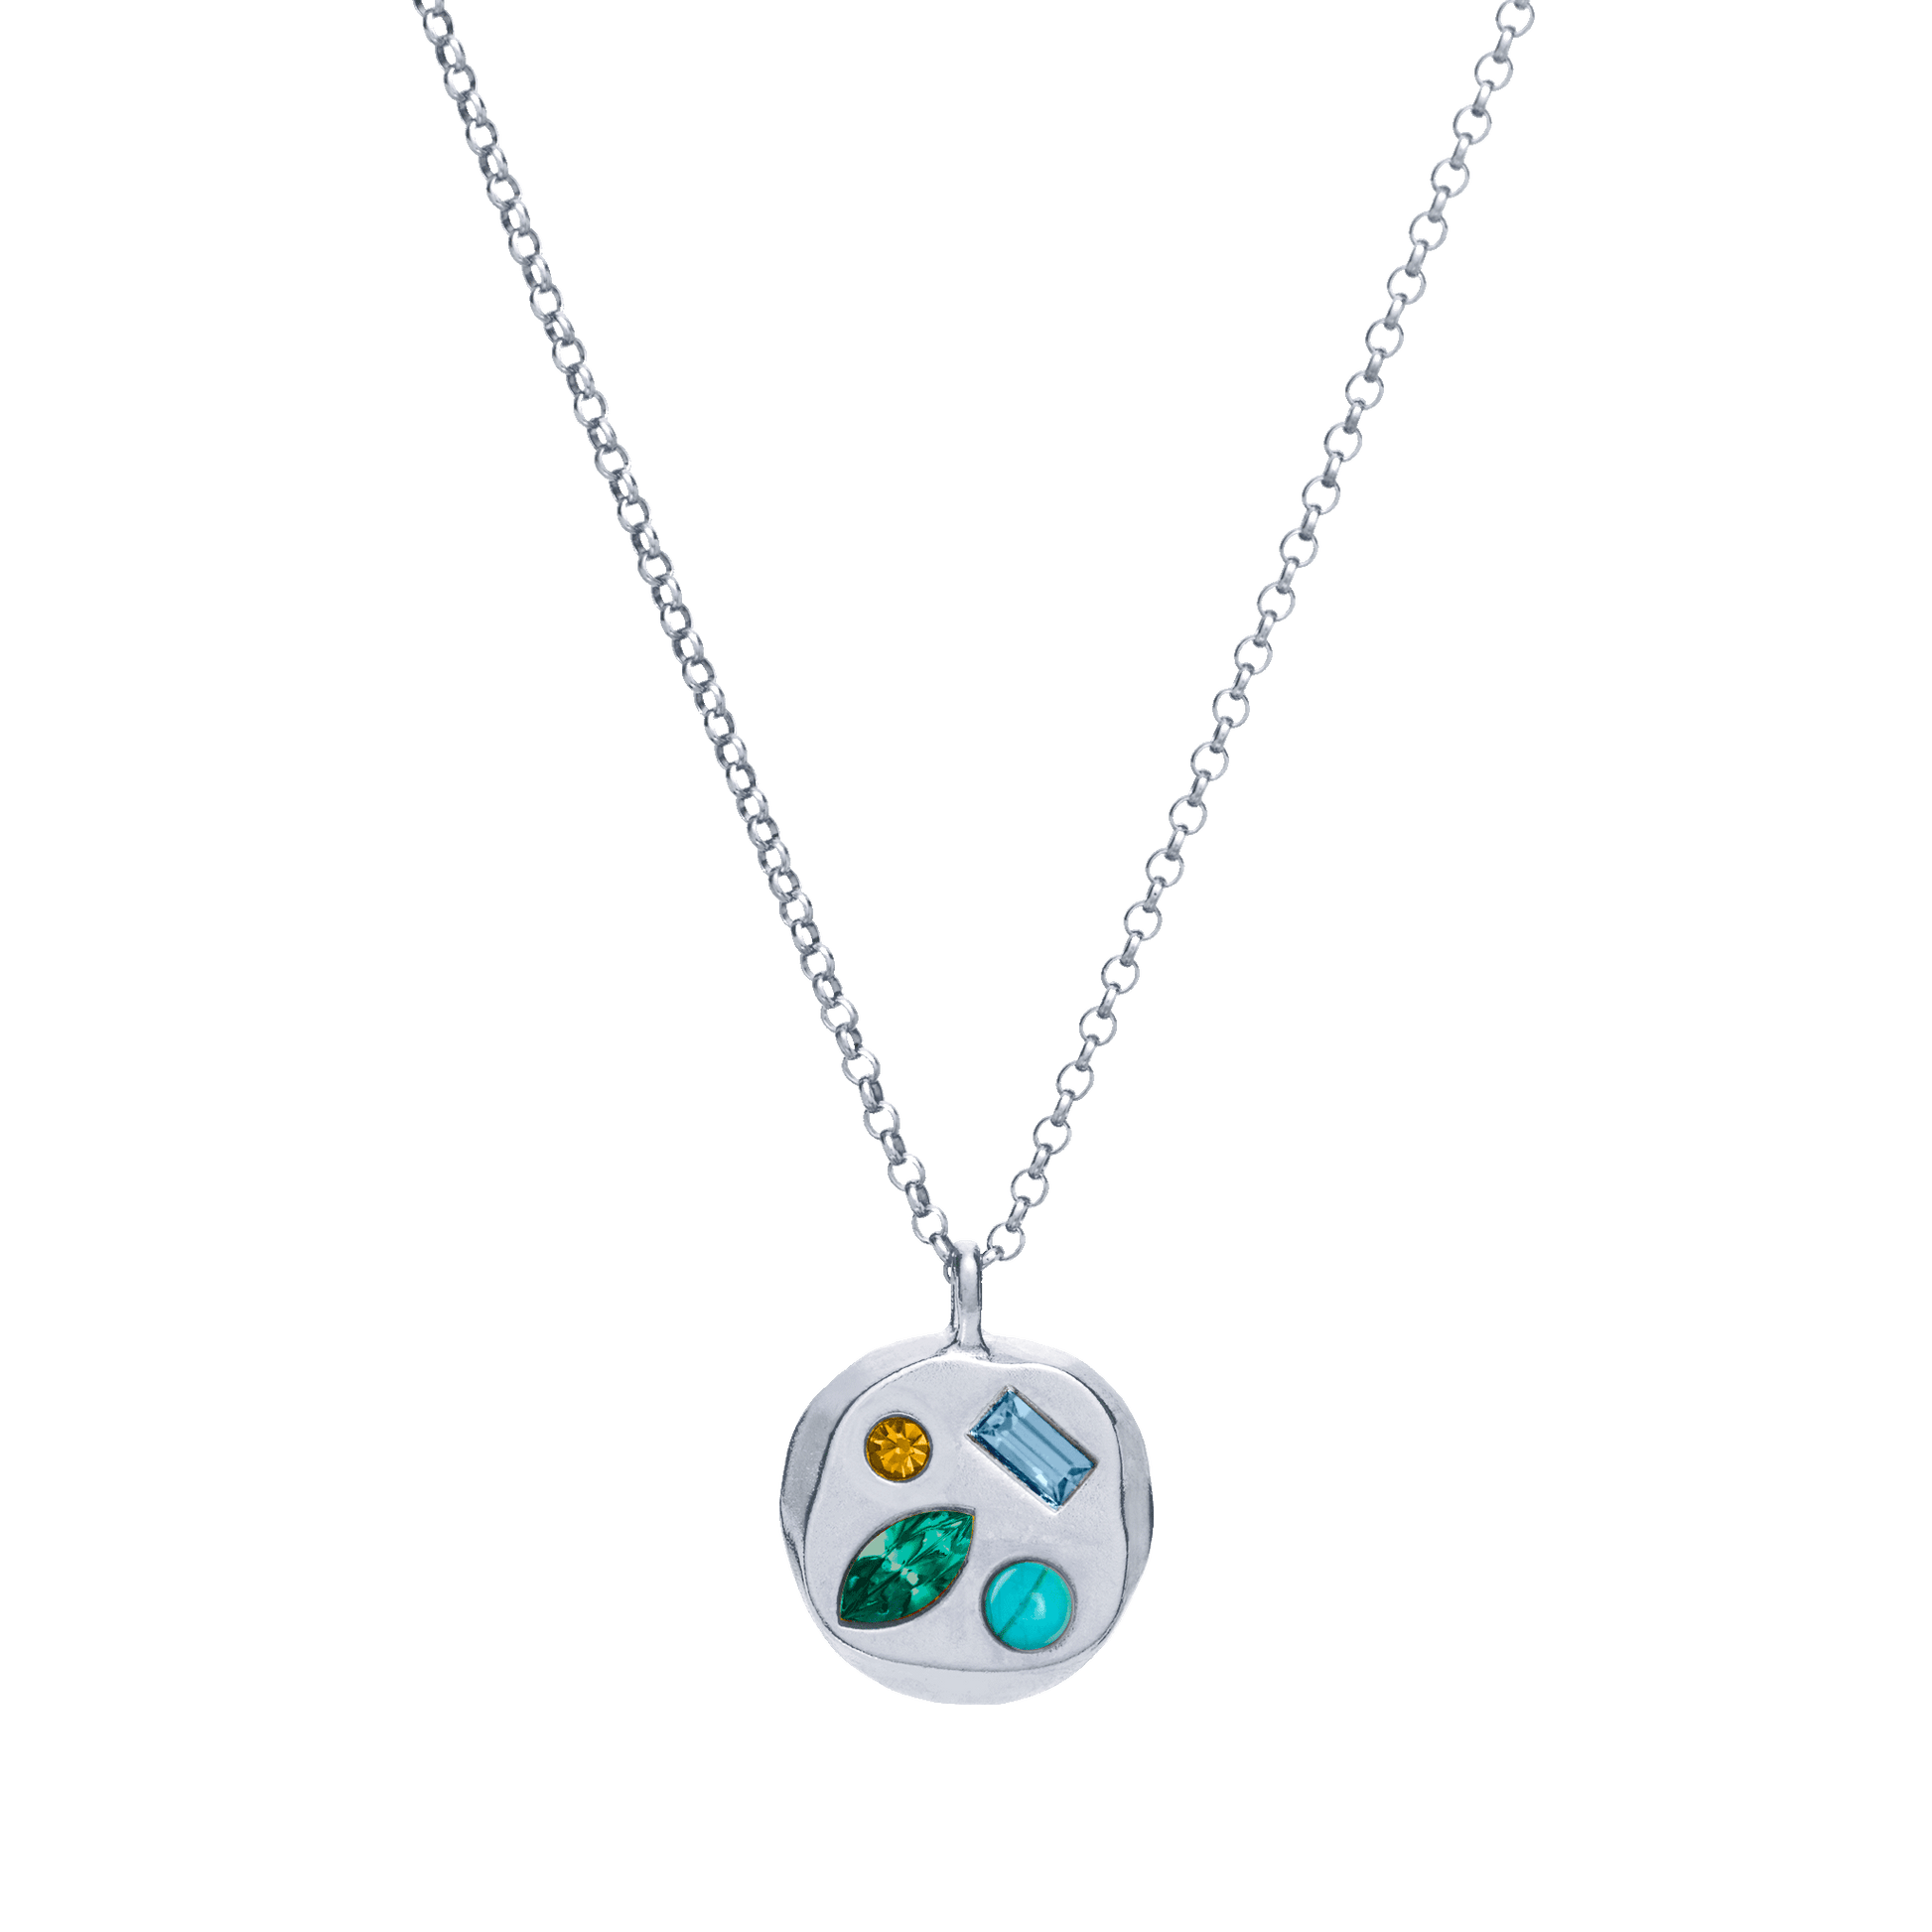 The May Twenty-Fifth Pendant in Sterling Silver